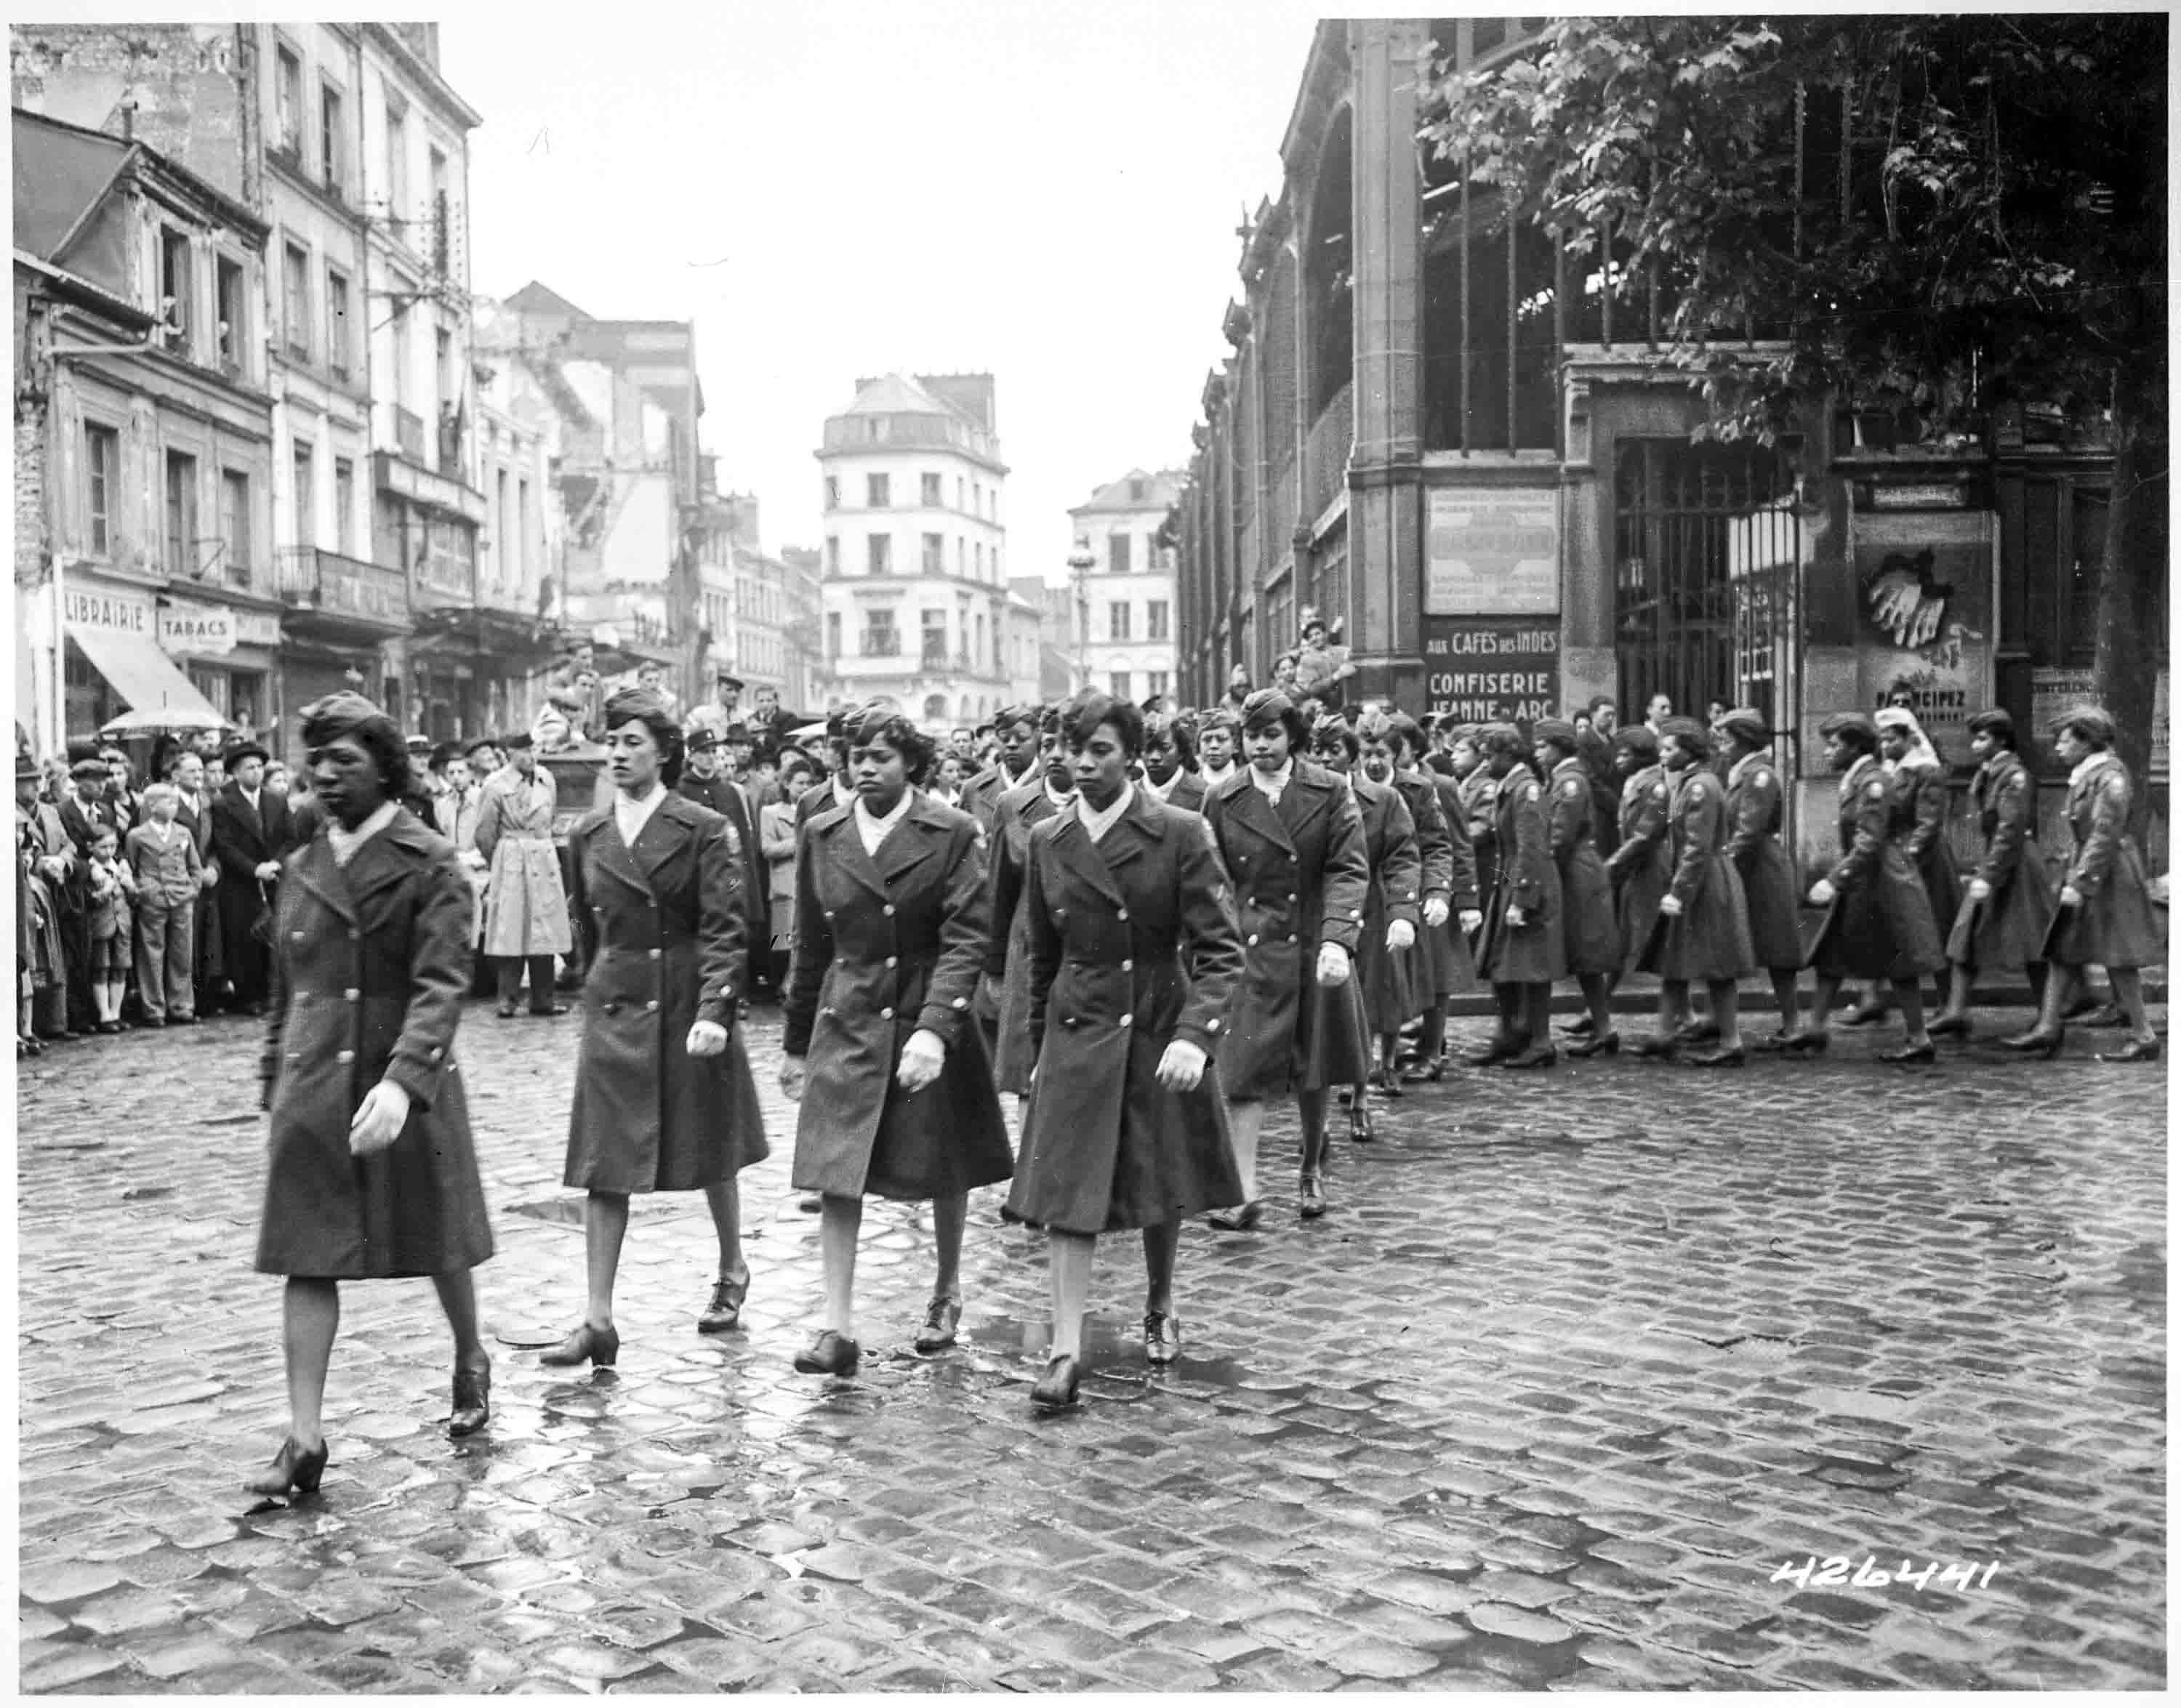 Members of the 6888th participate in a victory parade on 27 May 1945 in Rouen, France, passing through the market place where Joan of Arc was executed. Photo by anonymous (27 May 1945). National Archives and Records Administration. PD-U.S. Government. Wikimedia Commons.